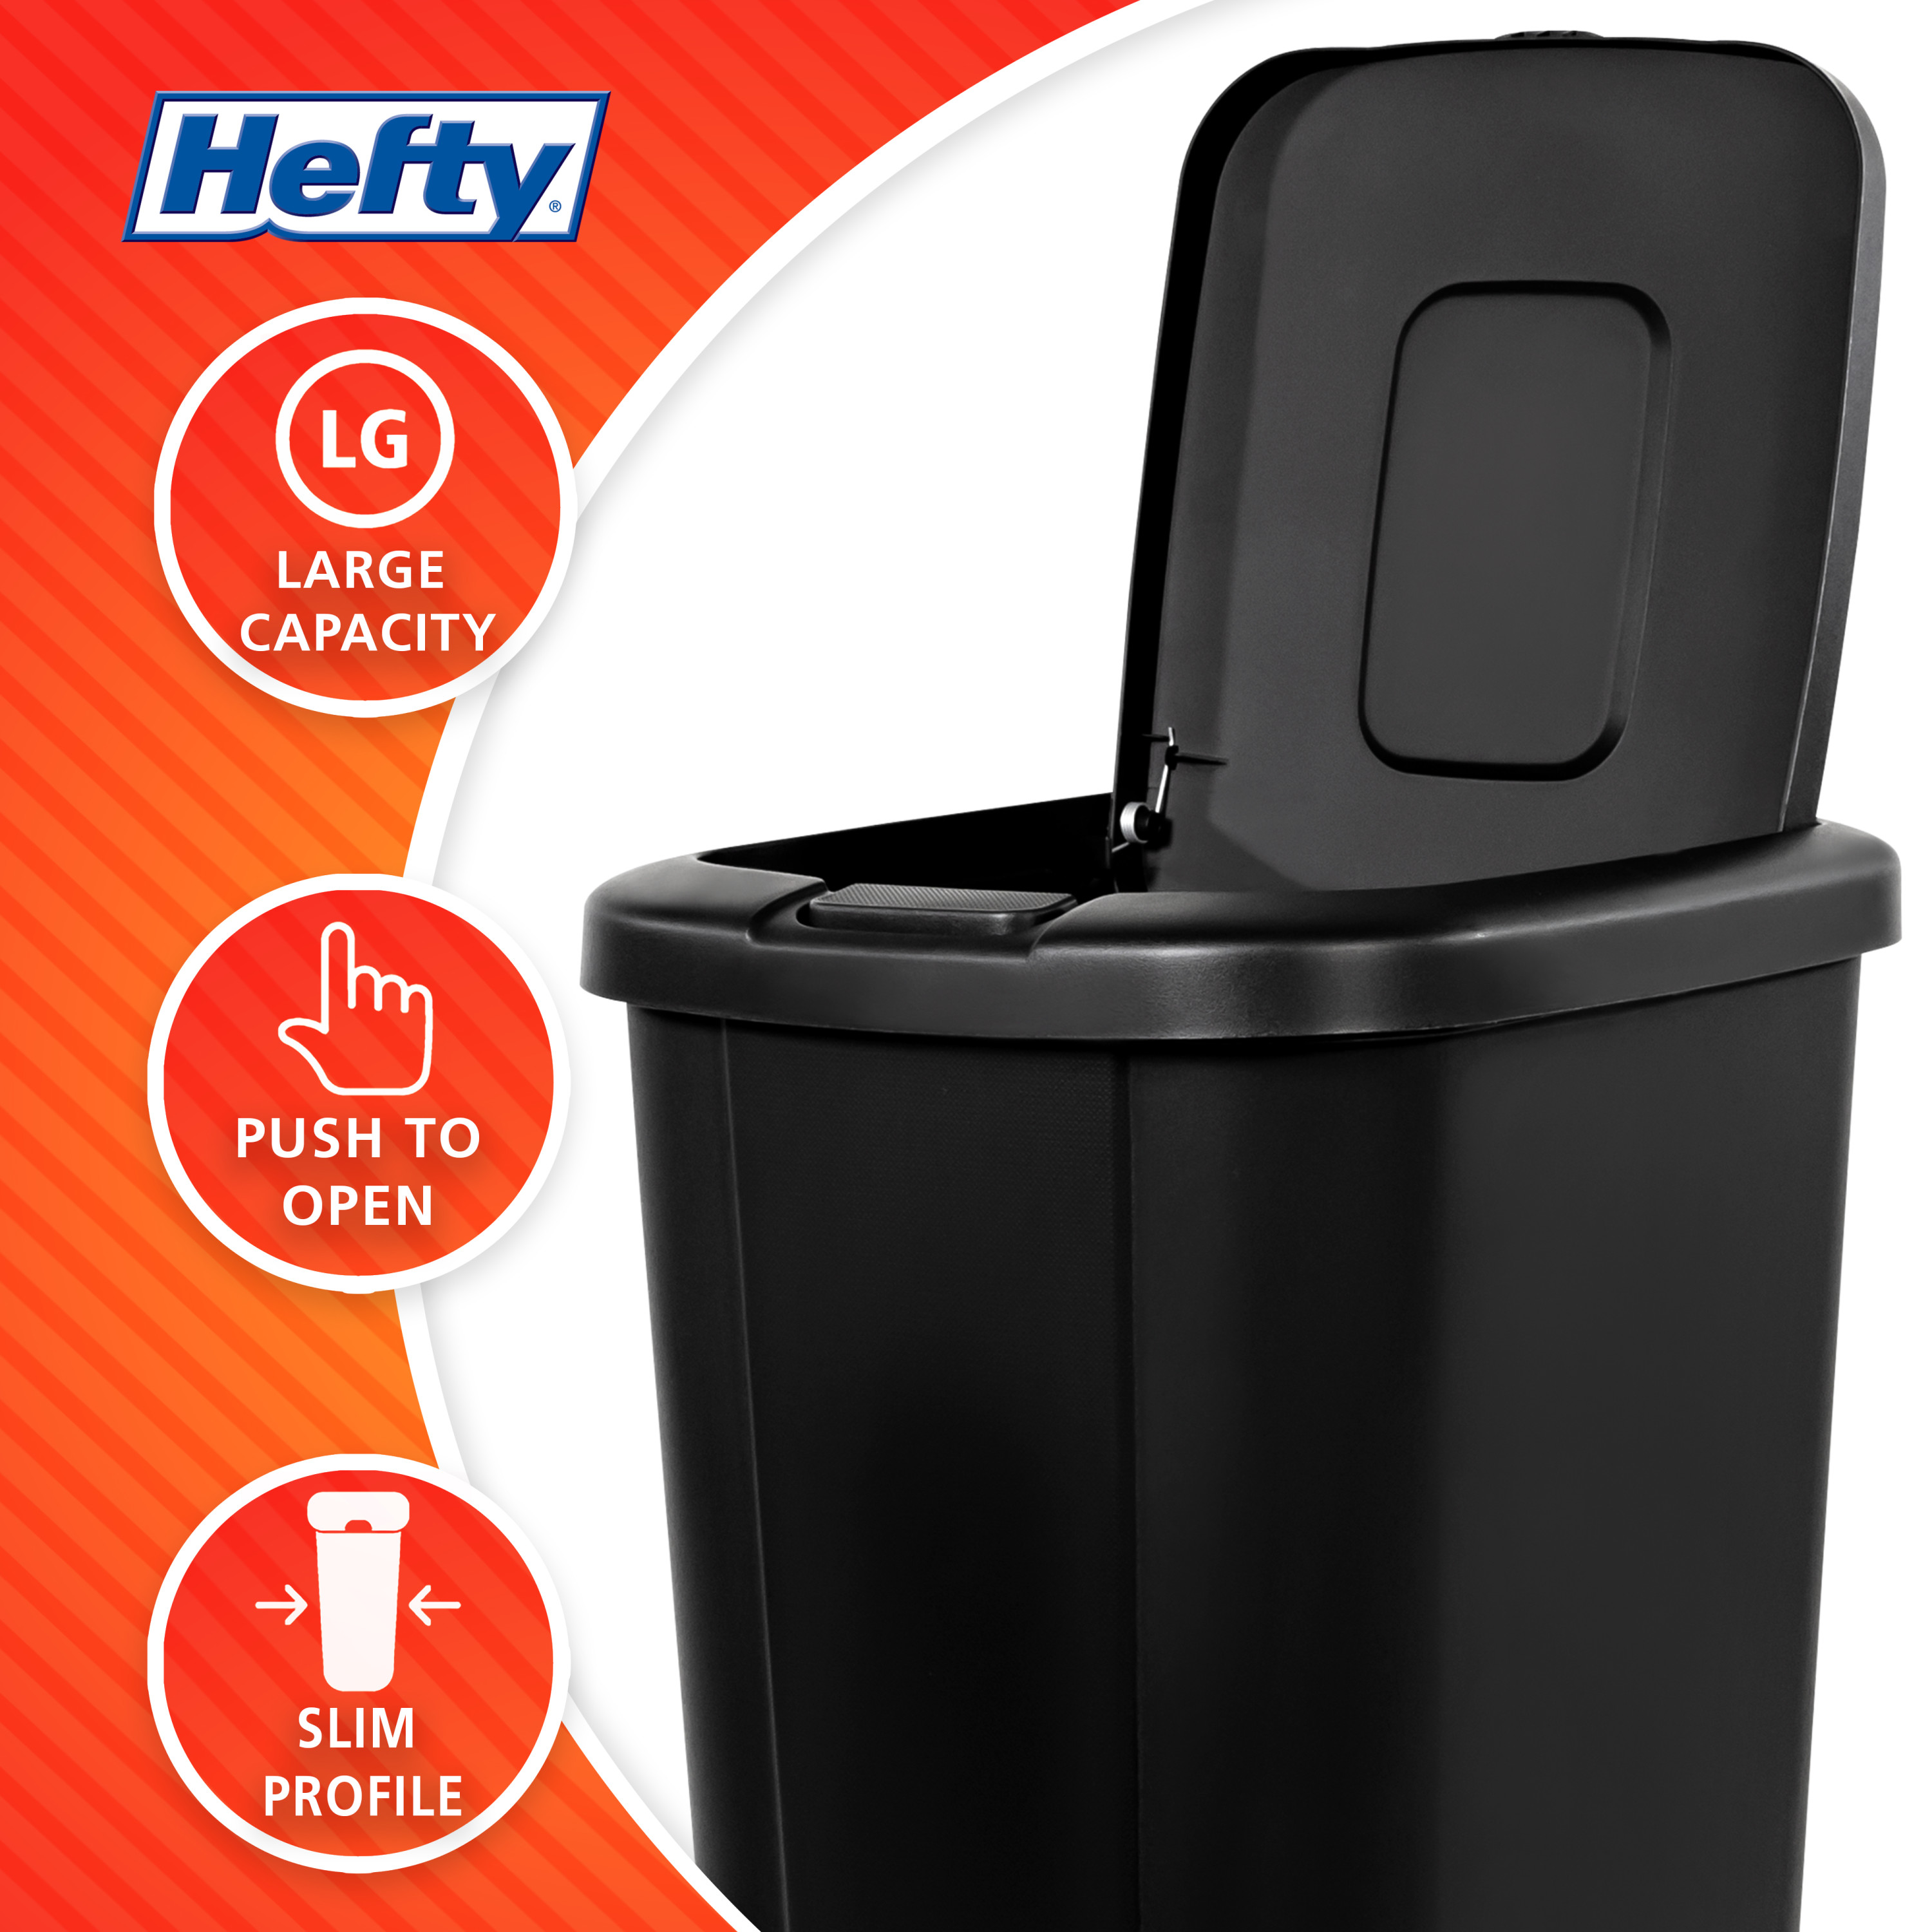 Hefty 13.3 Gallon Trash Can, Plastic Touch Top Kitchen Trash Can, Black - image 2 of 8